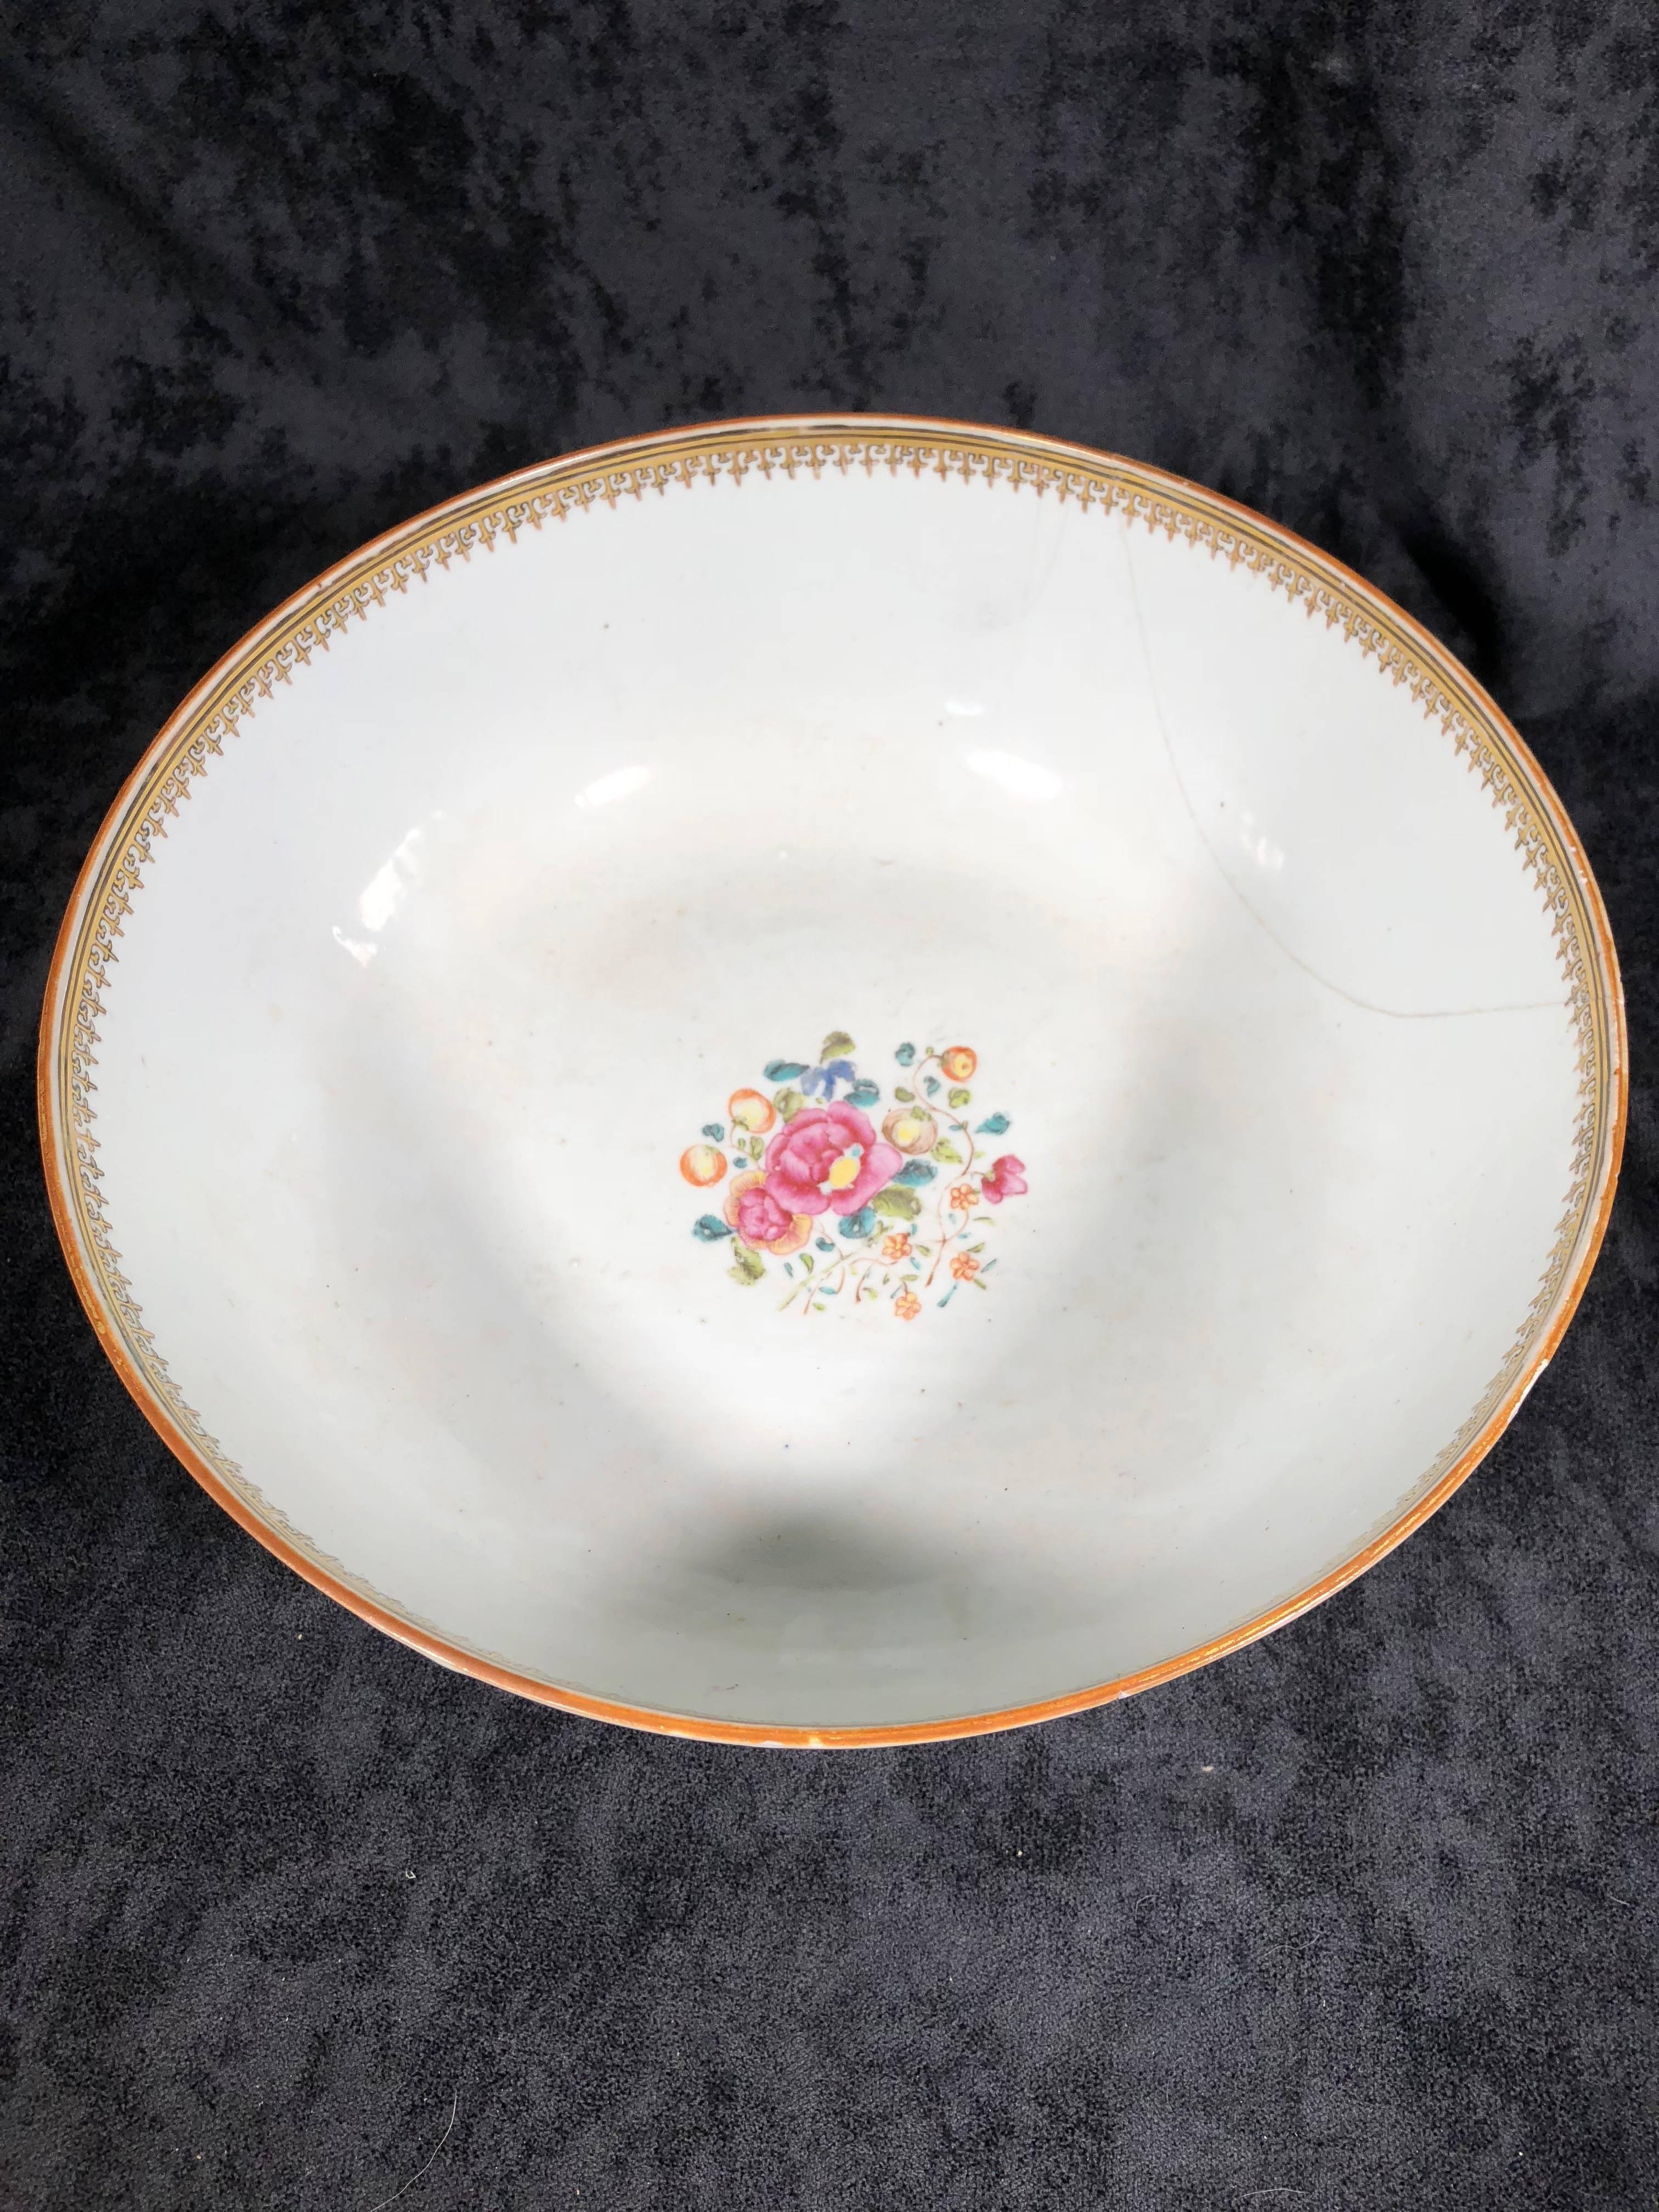 Very elegant, large and well produced 18th century Qianlong period Chinese export punch bowl. Depicting various motifs of Chinese culture to include court scenes with upper class socialites smoking opium pipes. This bowl is 12.5 inches wide x 5.90